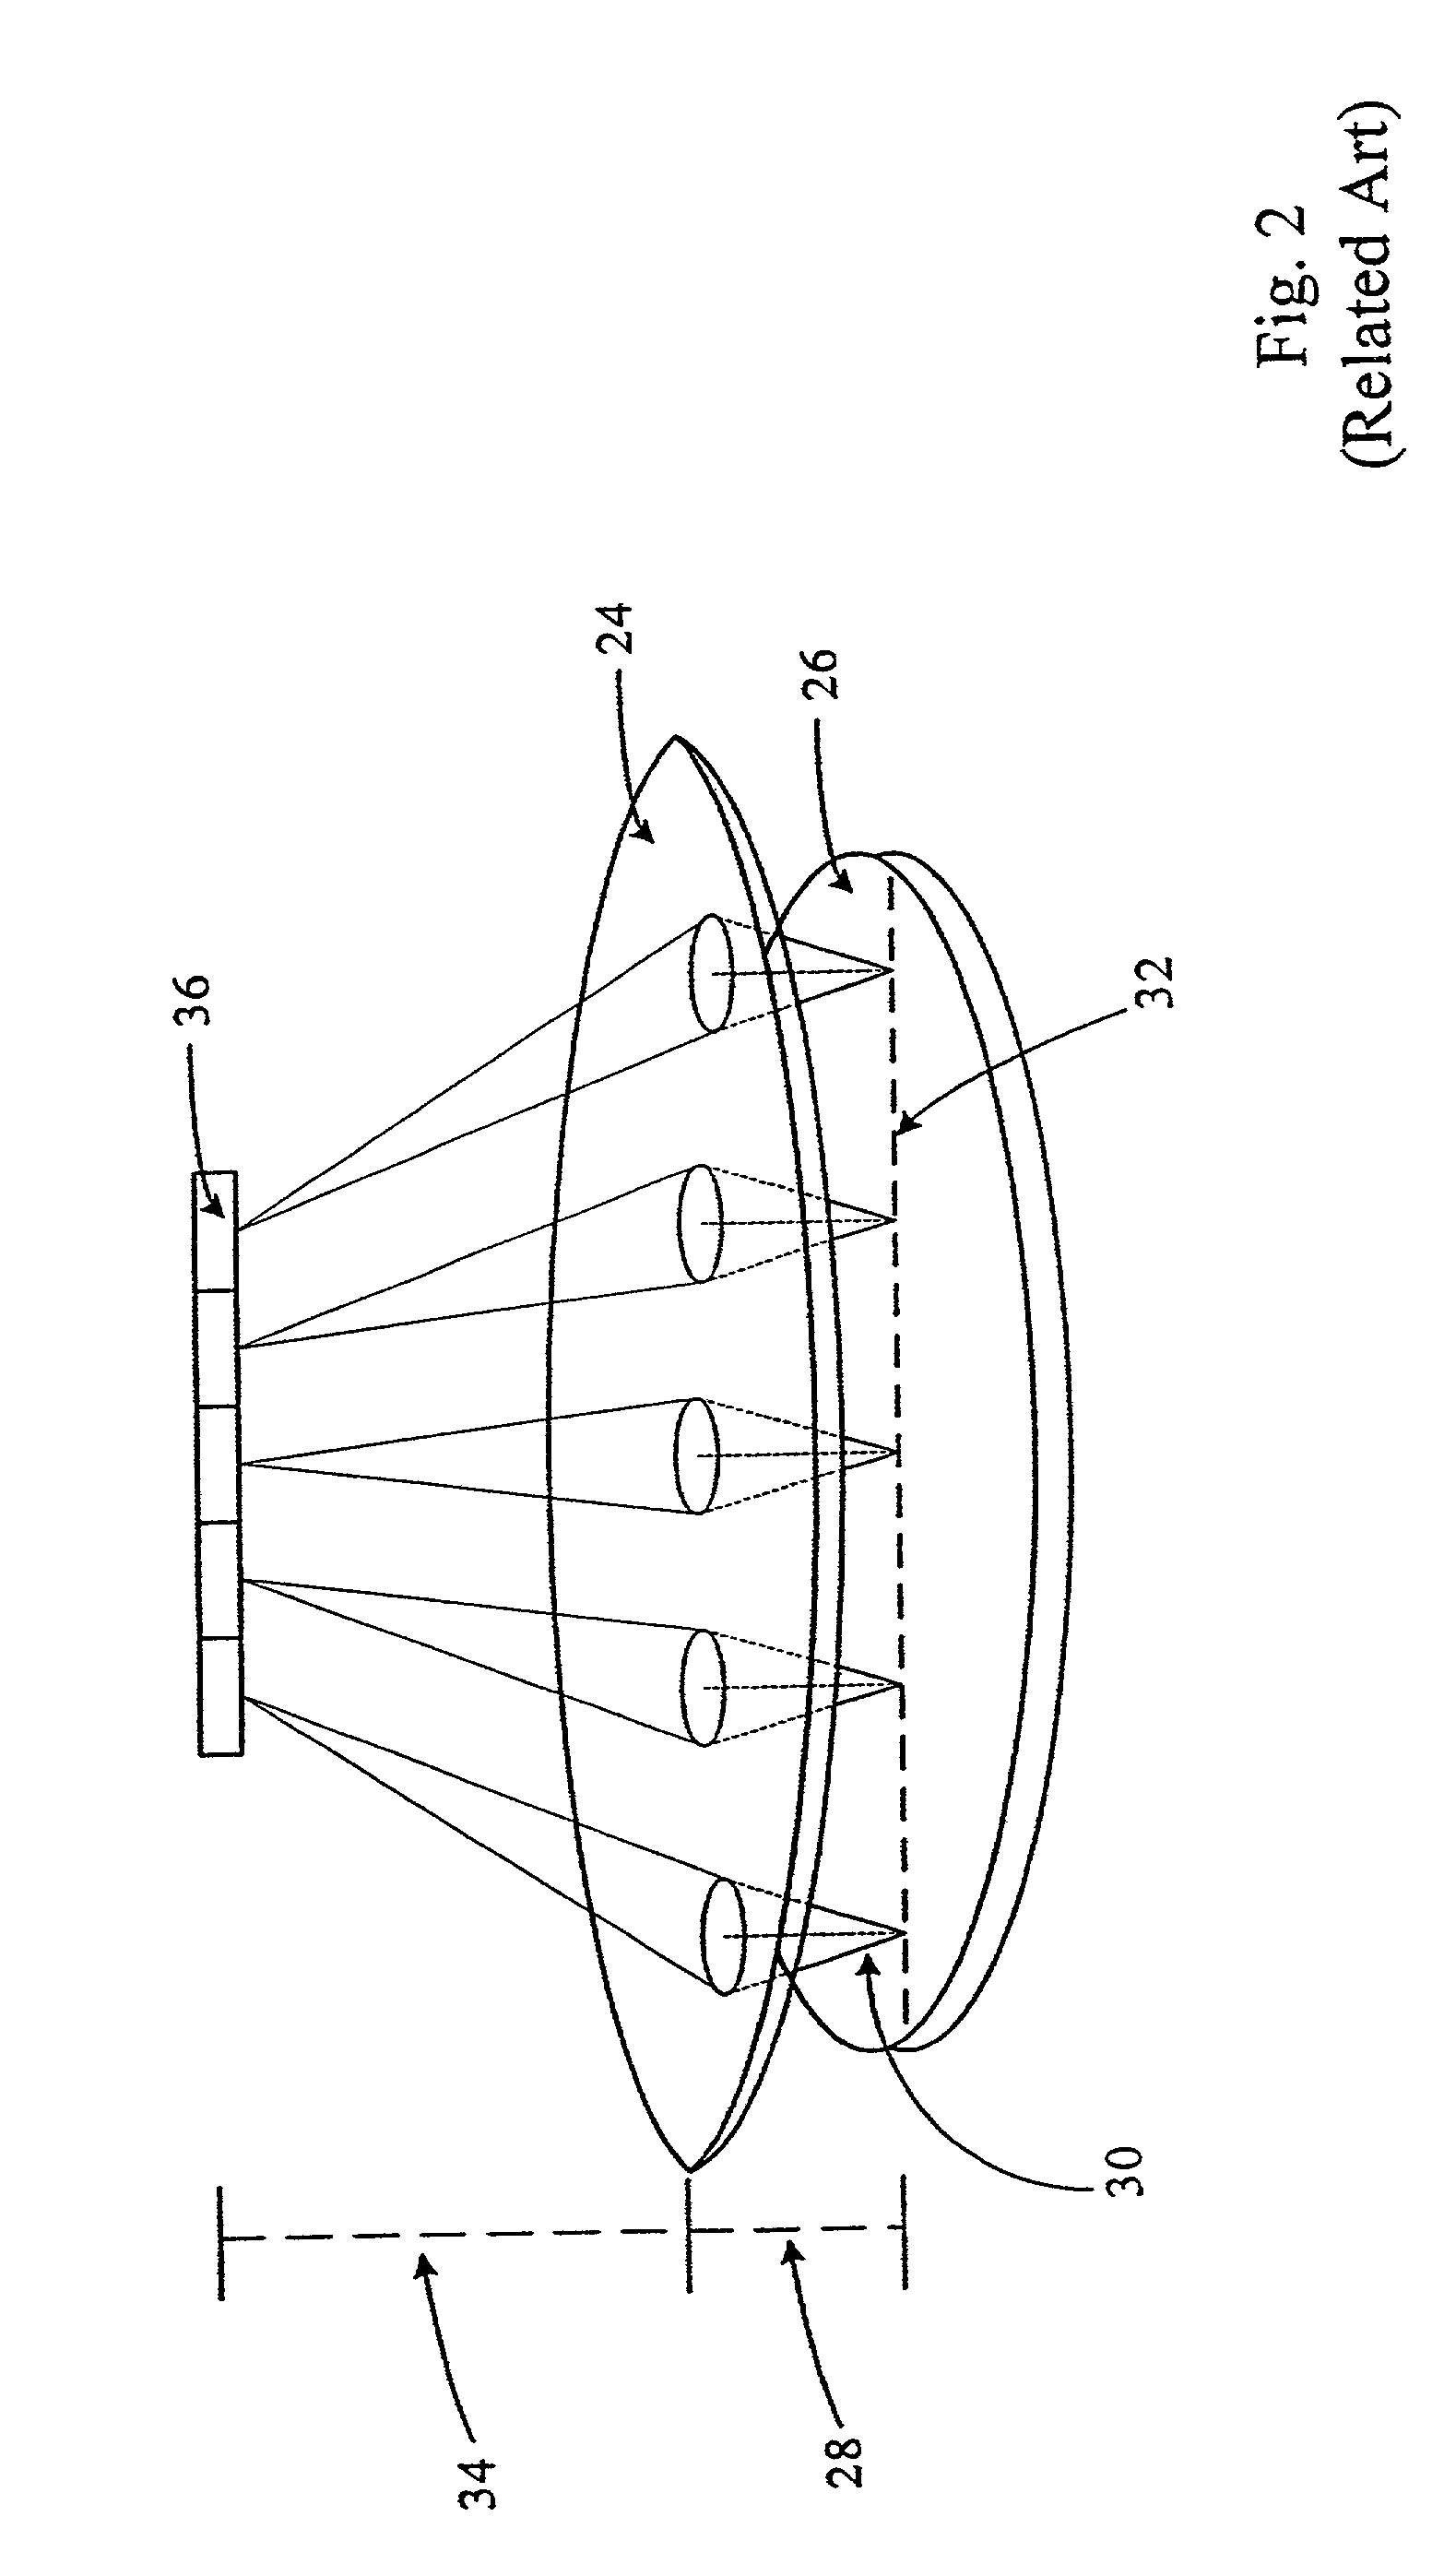 Systems and methods for inspection of specimen surfaces